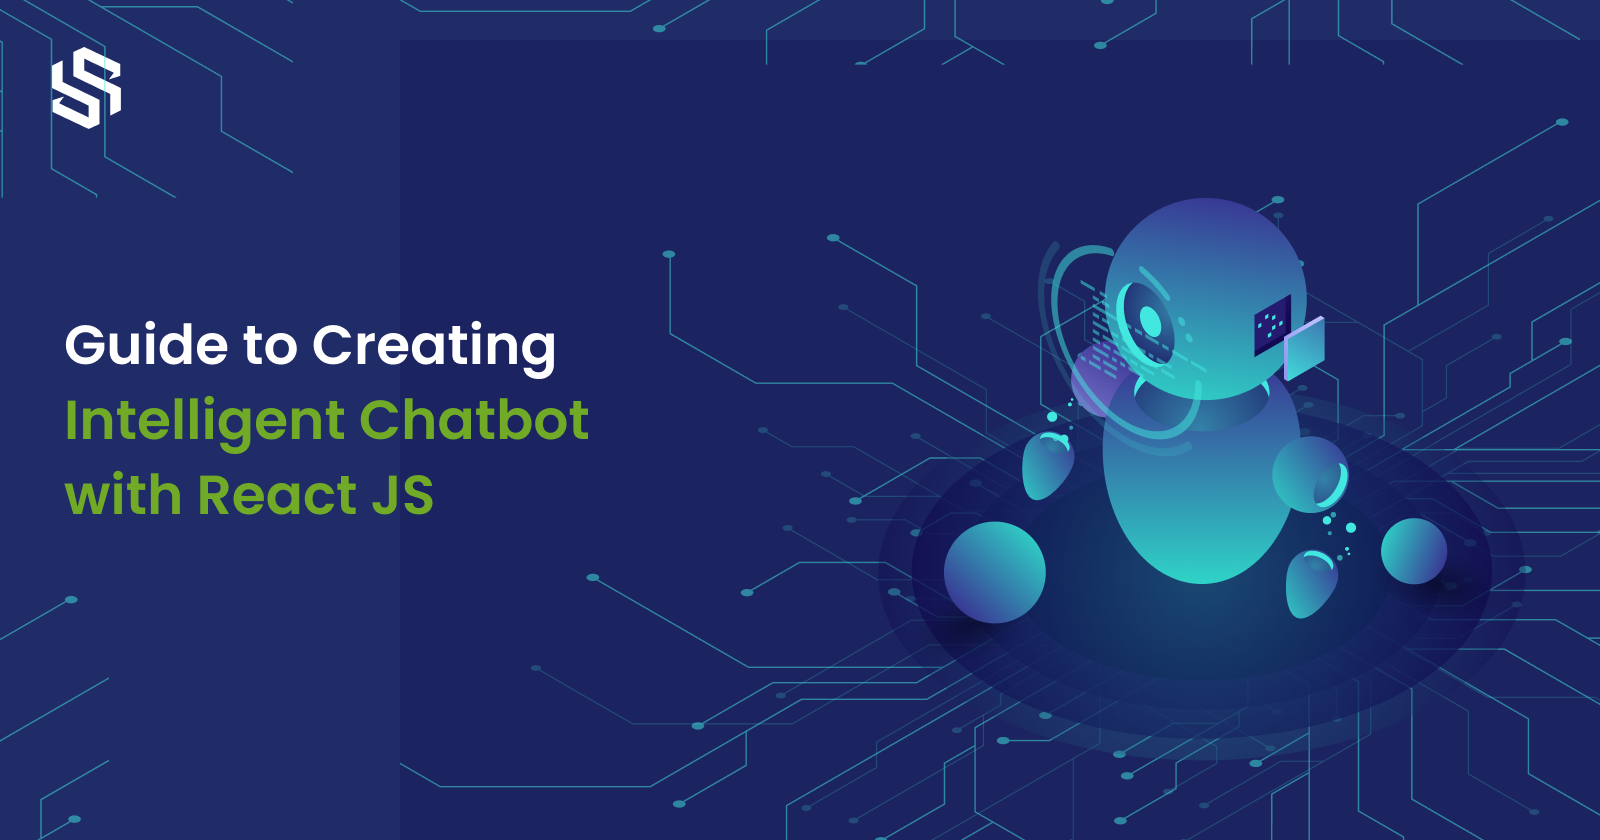 Guide to Creating Intelligent Chatbot with React JS